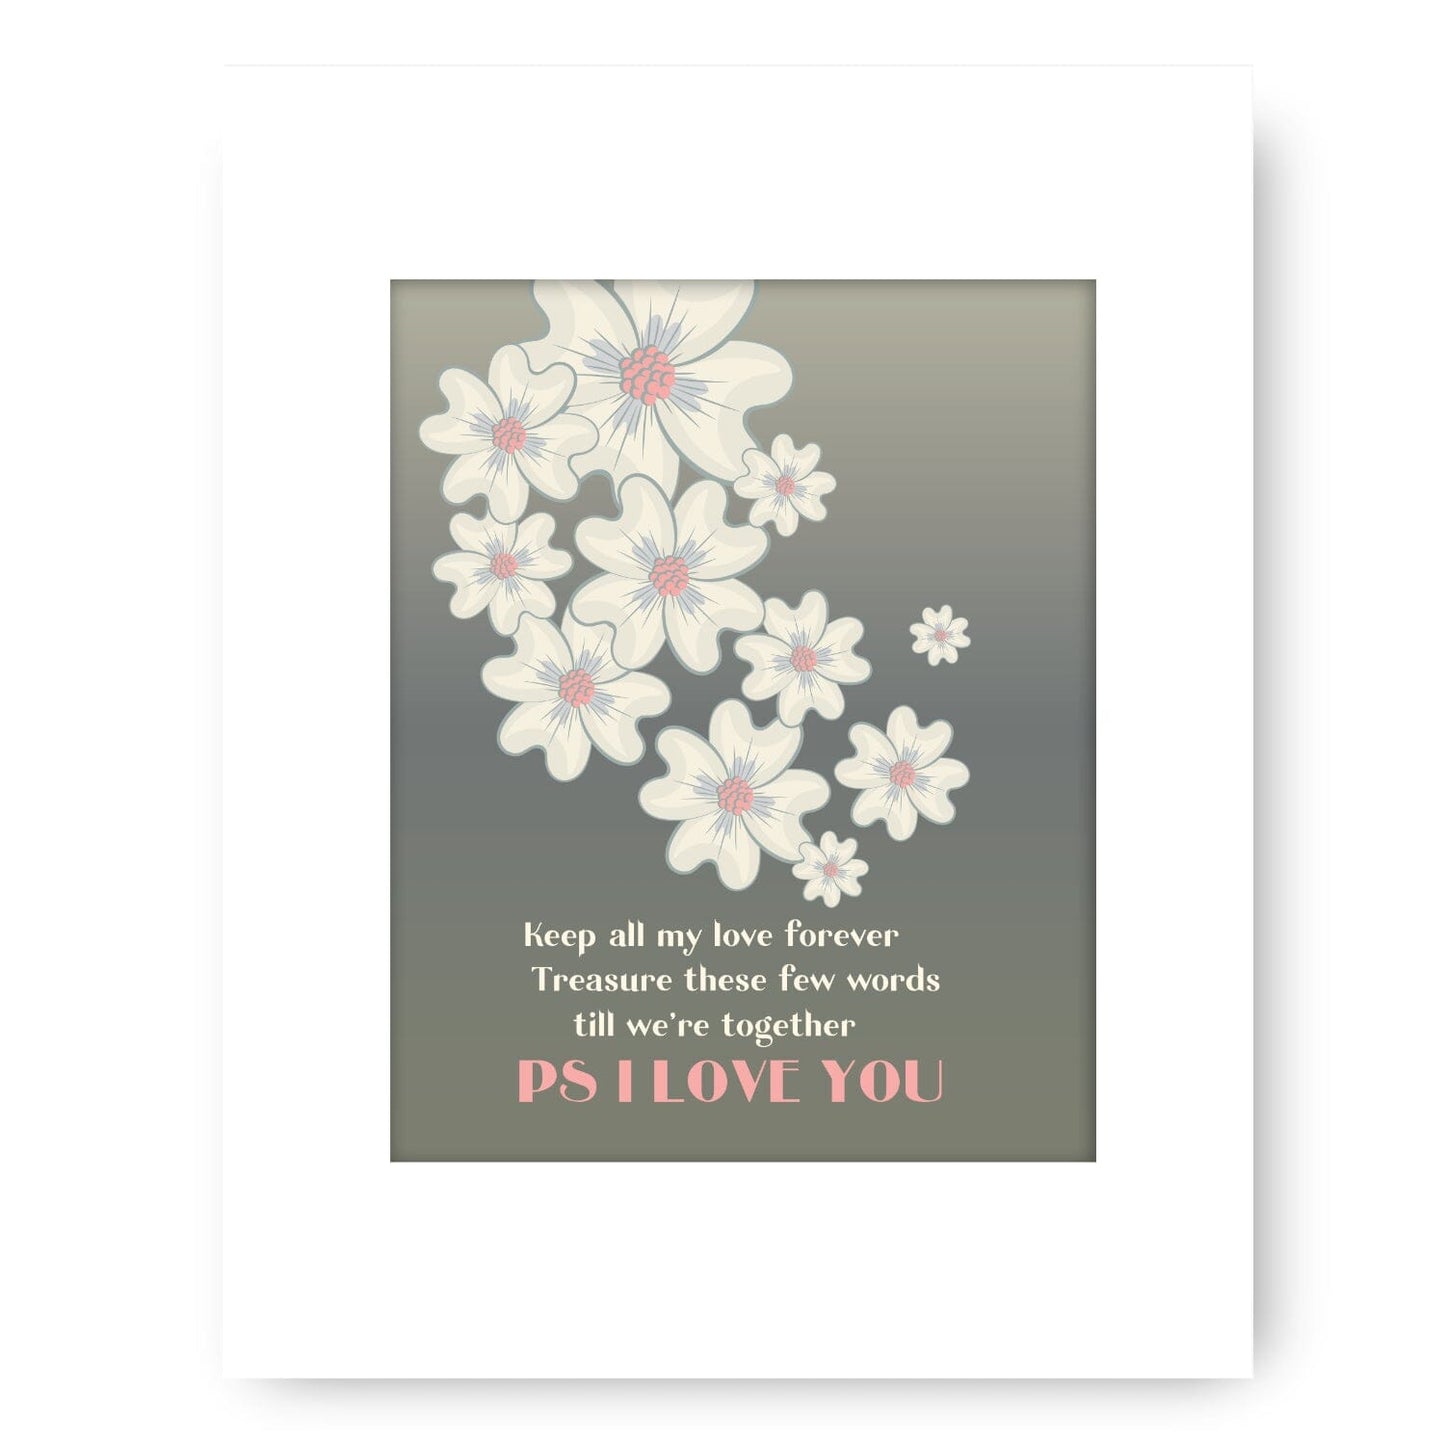 PS I Love You by Beatles - Music Memorabilia Love Song Art Song Lyrics Art Song Lyrics Art 8x10 White Matted Print 